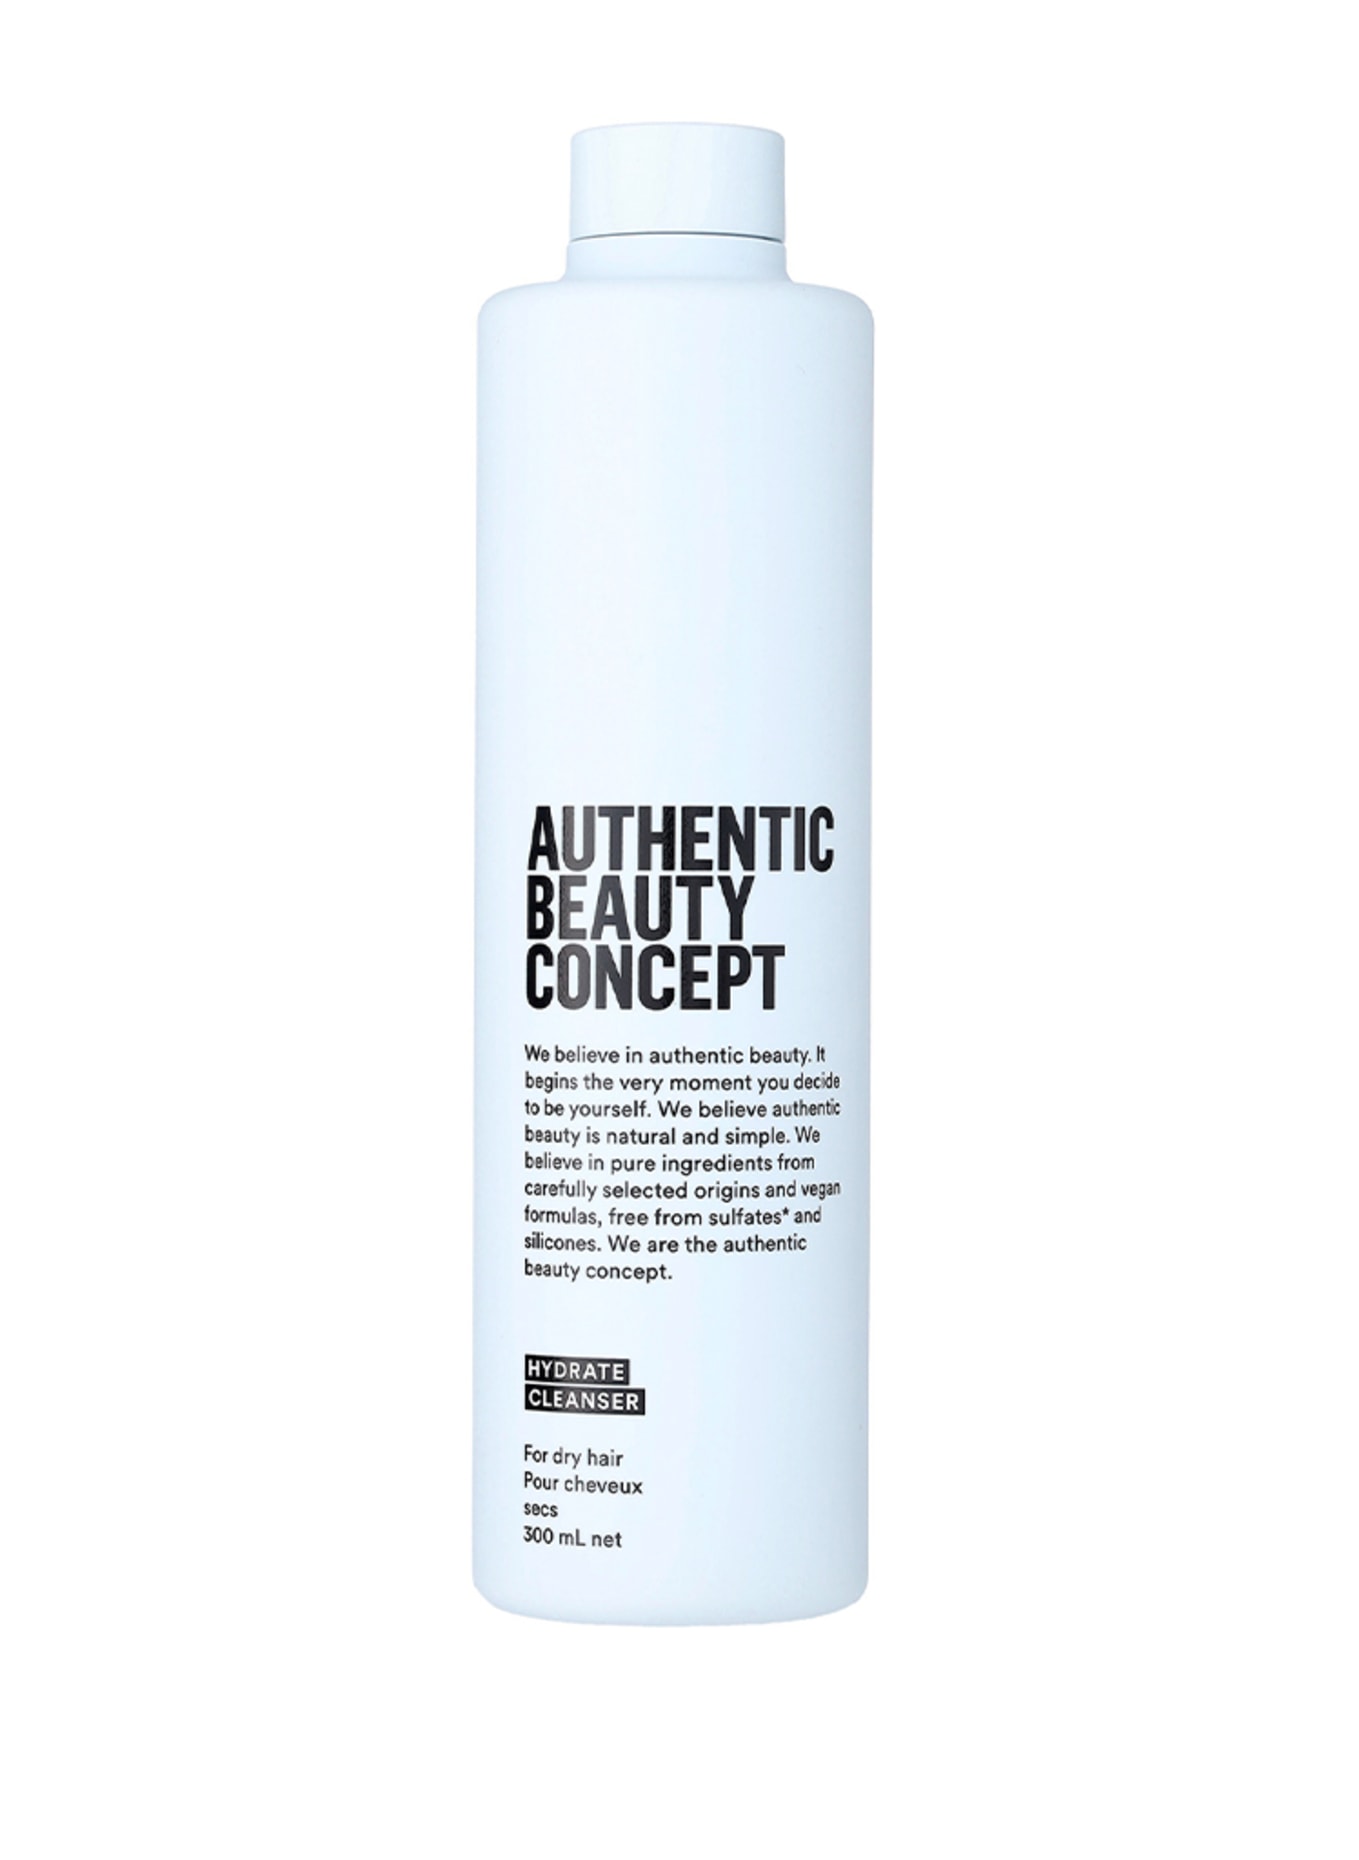 AUTHENTIC BEAUTY CONCEPT HYDRATE CLEANSER (Obrázek 1)